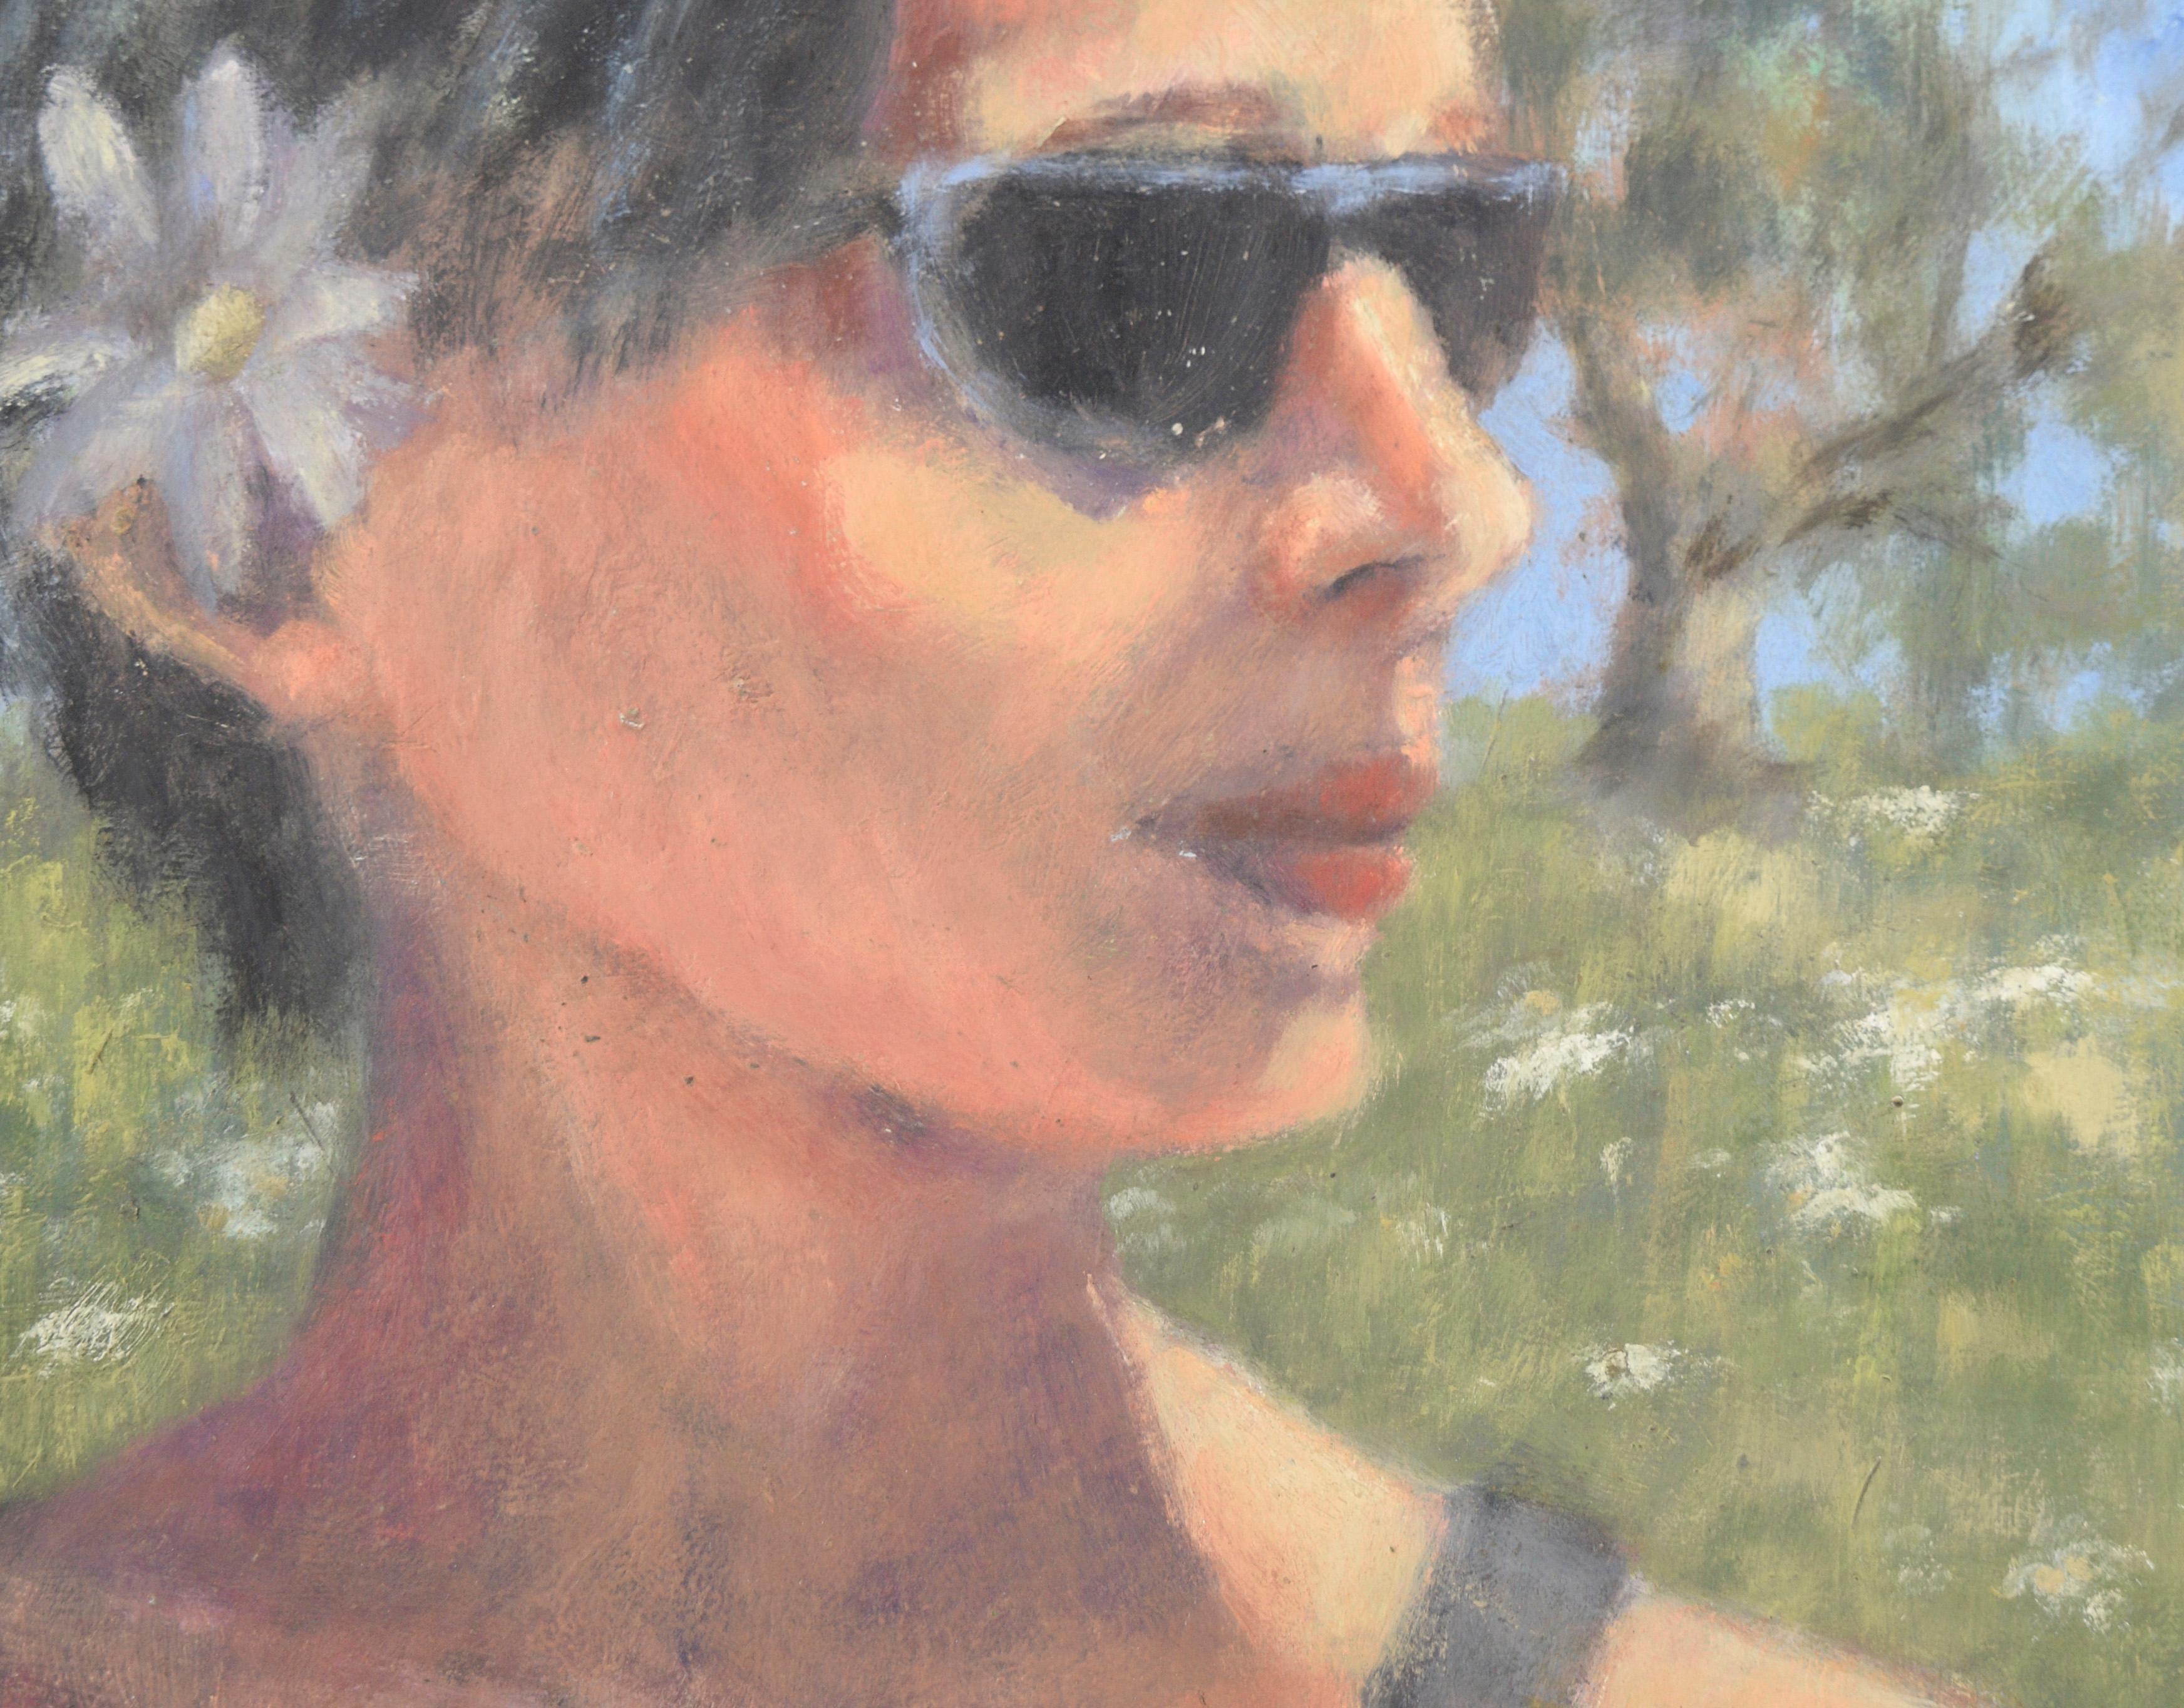 Portrait of a California Woman with Sunglasses in Acrylic on Masonite

Portrait of a woman with sunglasses by an unknown central California coast artist Maria Pavao Hadsell (Potugal/American, 20th Century). A woman is looking to the right of the